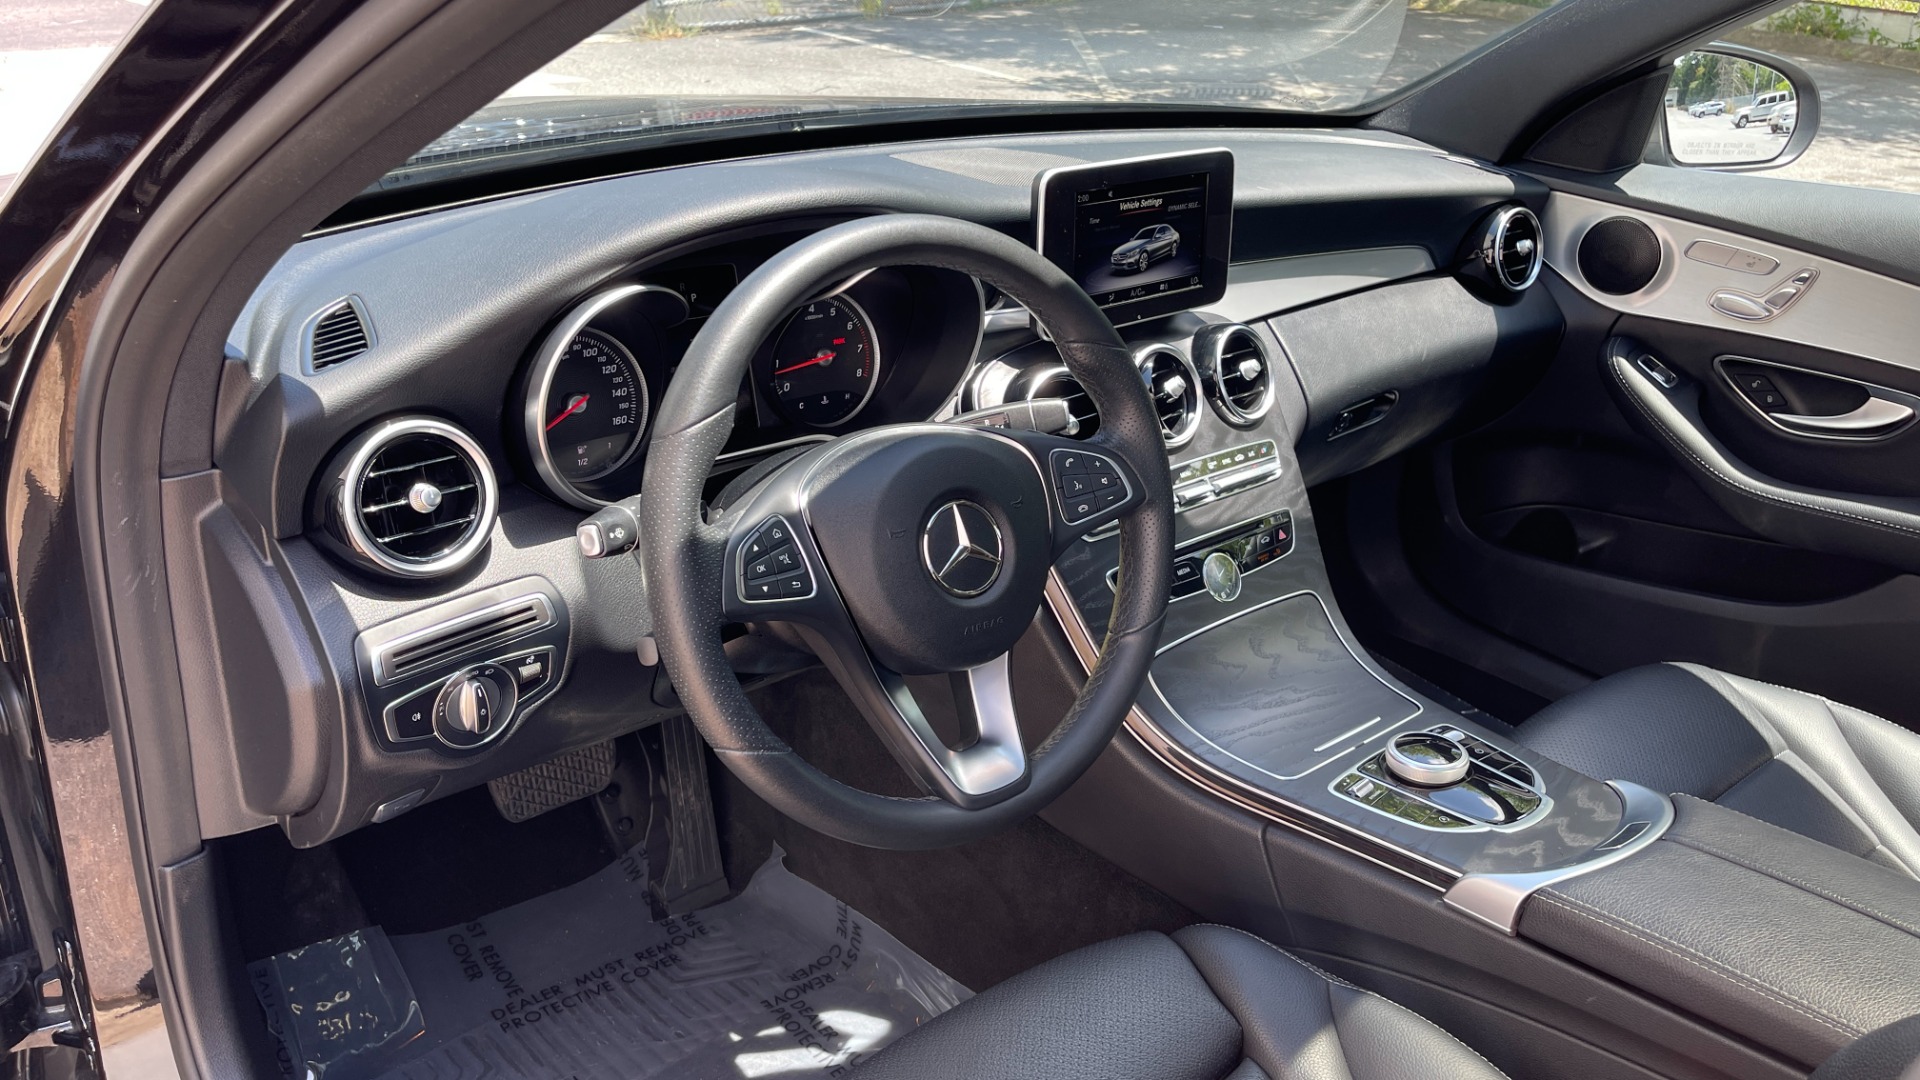 Used 2018 Mercedes-Benz C-Class C 300 / PREMIUM / REVIEW CAM / HTD SEATS / 18IN WHEELS for sale $27,999 at Formula Imports in Charlotte NC 28227 8